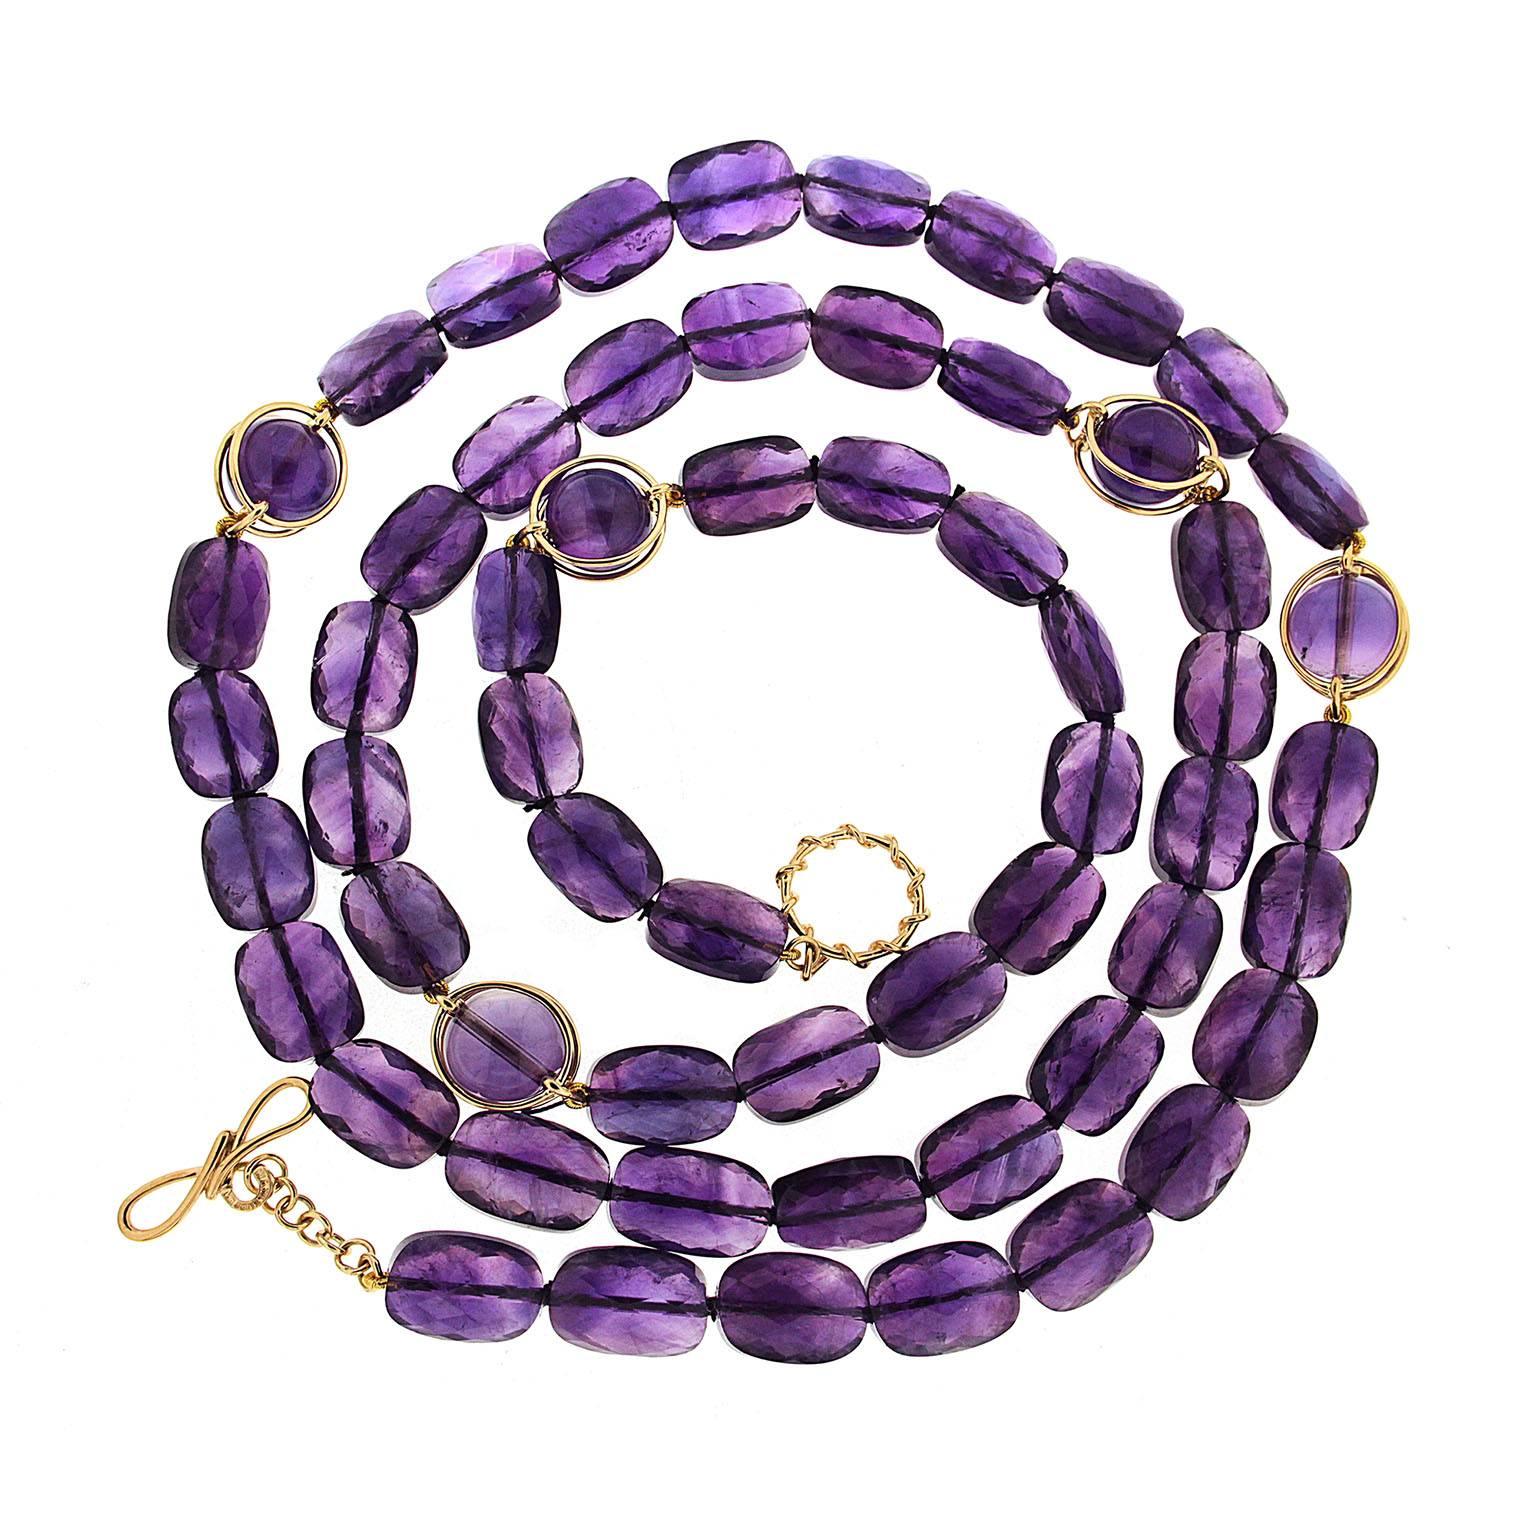 This lovely necklace features faceted Amethyst with 5 Doppio amethyst ball sections. The necklace is 40 inches long with knot and toggle clasp in 18kt yellow gold.